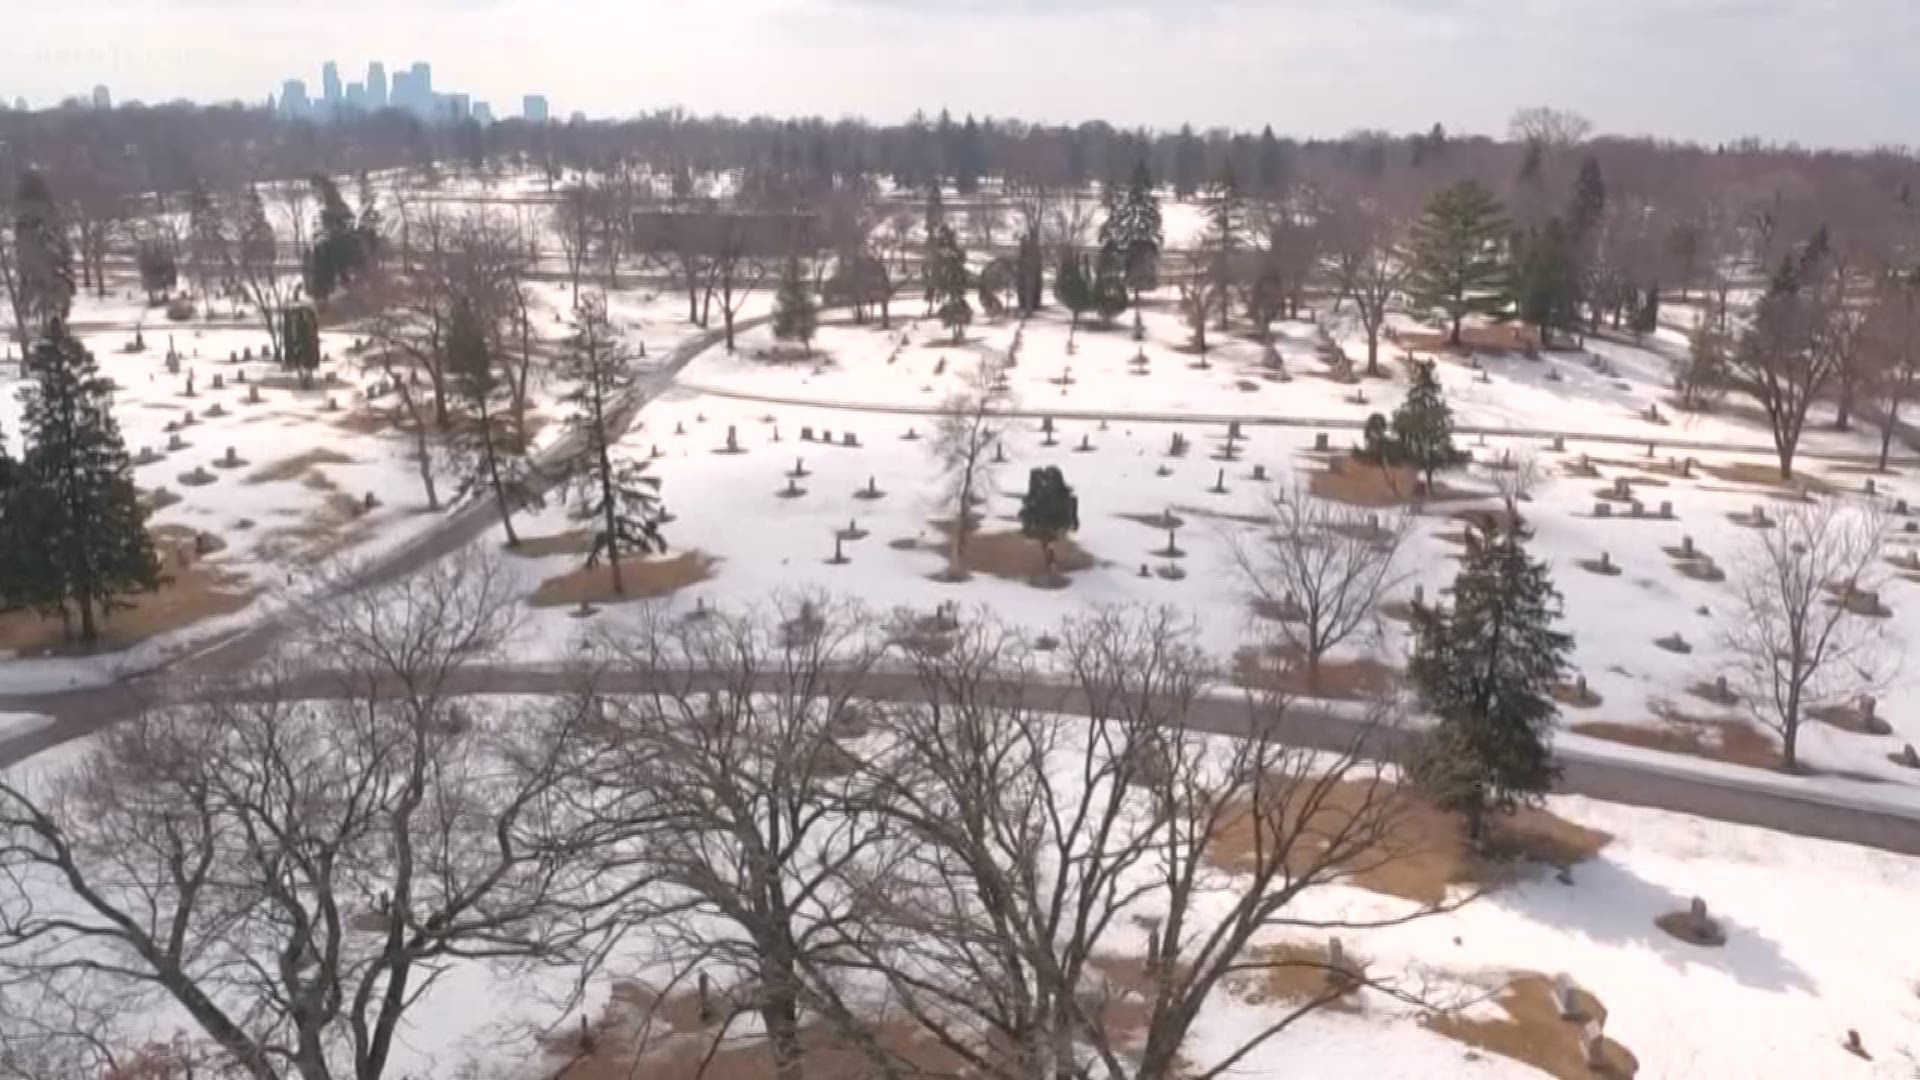 A funeral home owner in Minneapolis would like to give his 140-acre cemetery to the city.